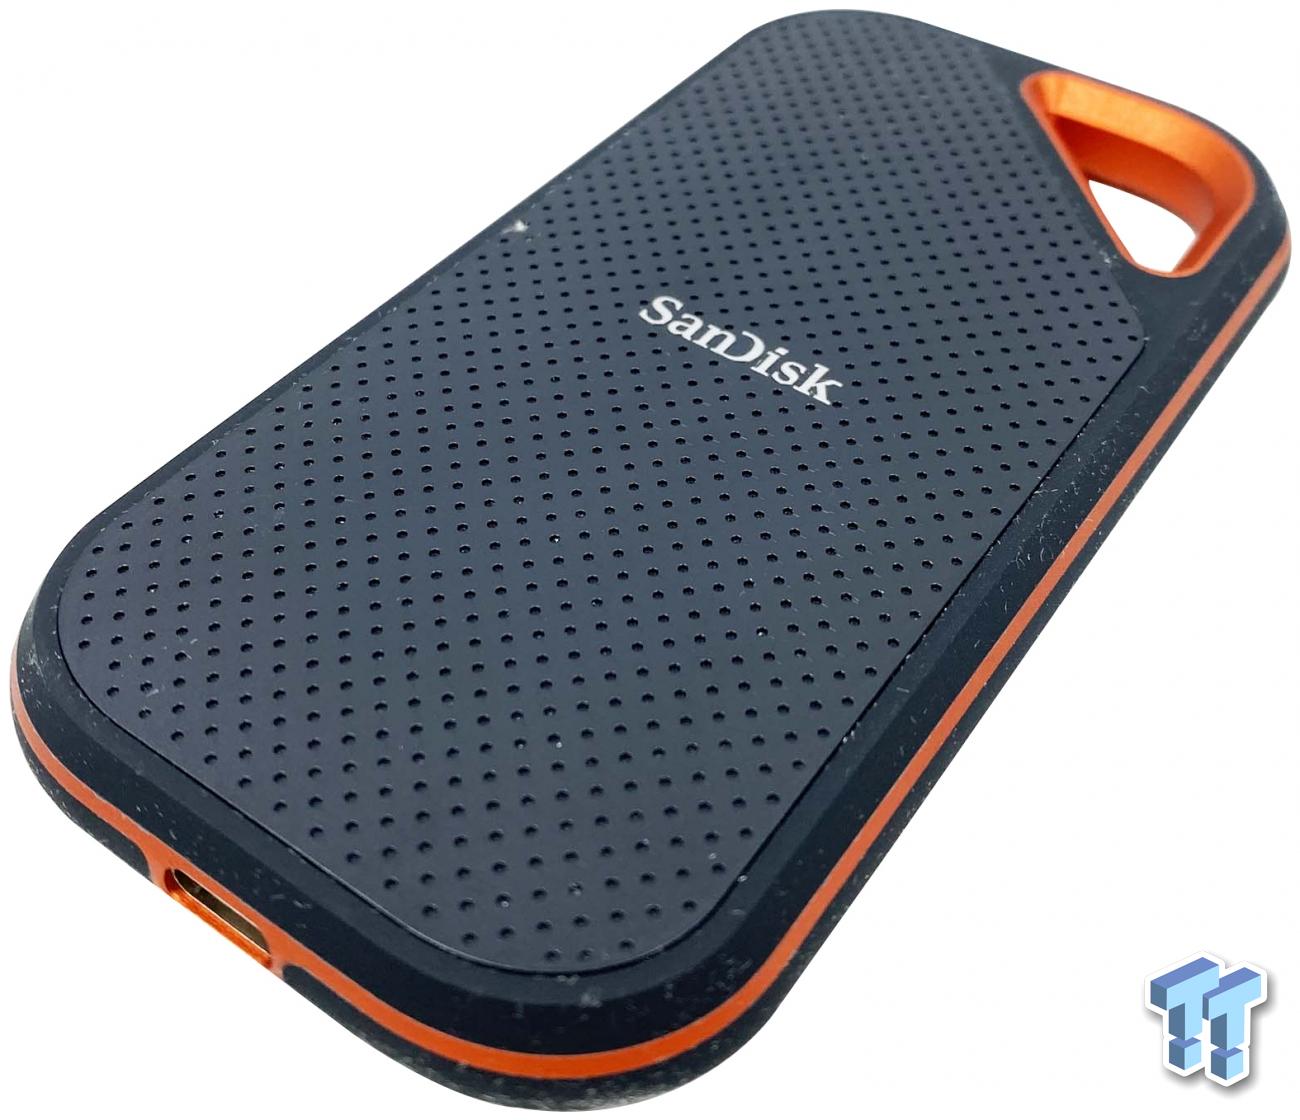 SanDisk Extreme PRO Portable SSD Review in 2024